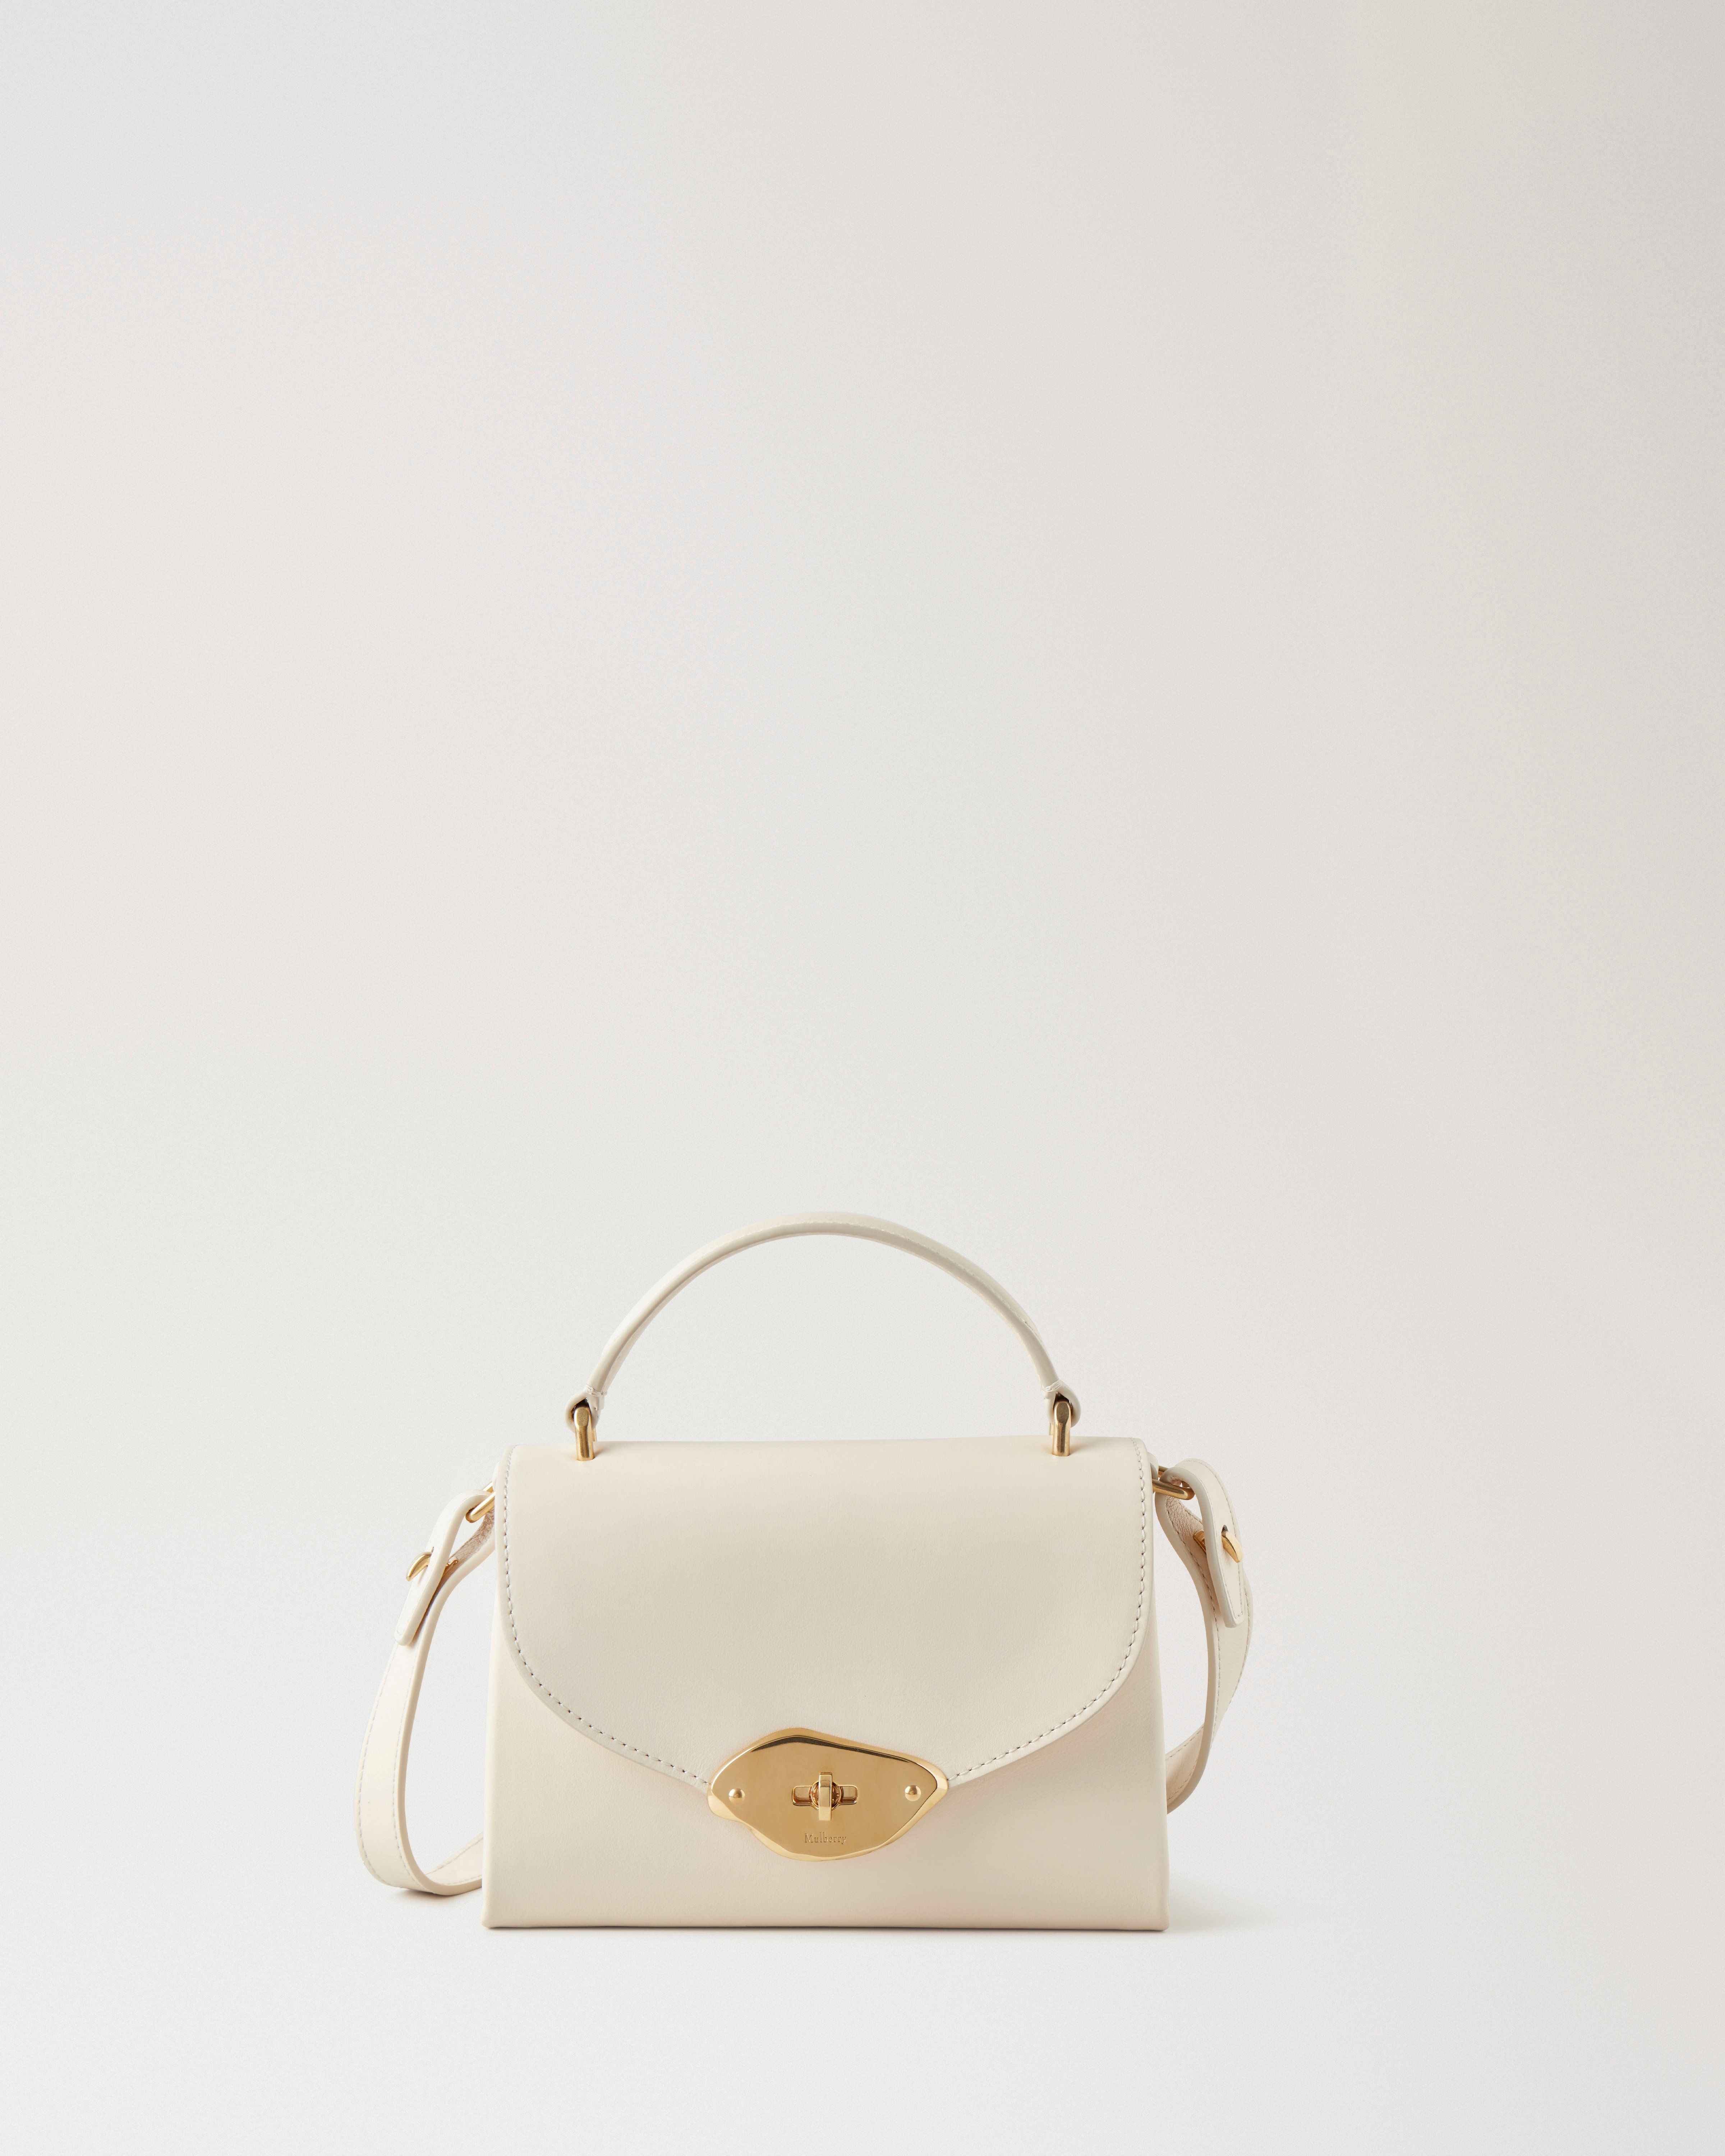 Mulberry Small Lana Top handle bag in eggshell